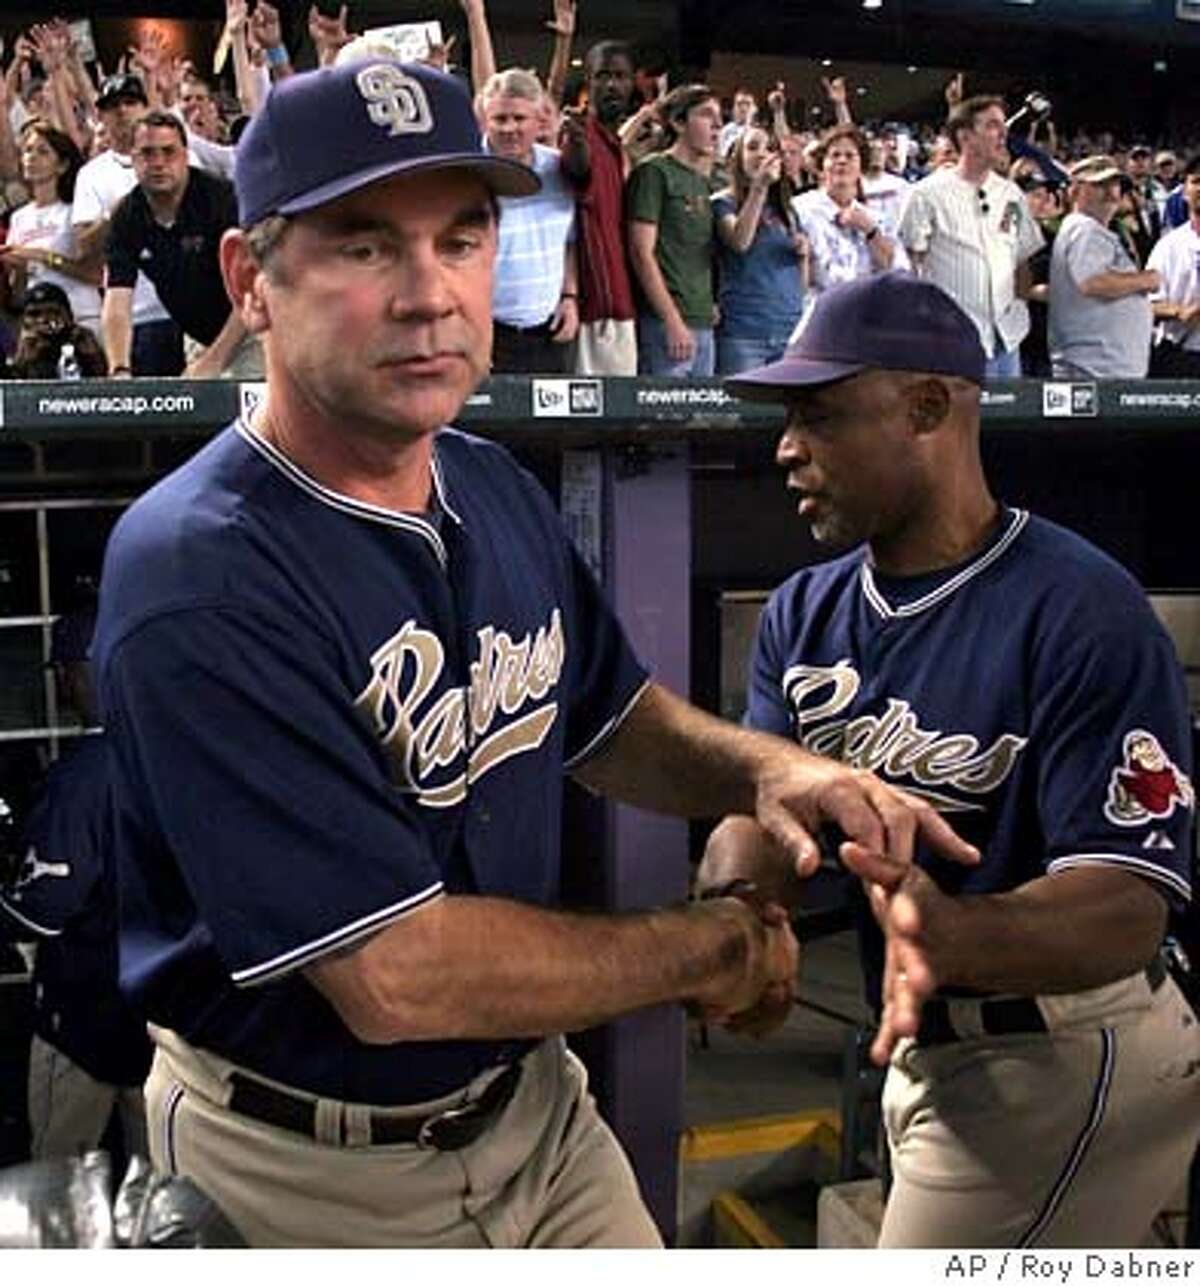 San Diego Padres manager Bruce Bochy, left, is congratulated by coach Ty Waller, following the Padres 7-6 win over the Arizona Diamondbacks, to win the National League West, Sunday, Oct. 1, 2006 in Phoenix. (AP Photo/Roy Dabner) EFE OUT